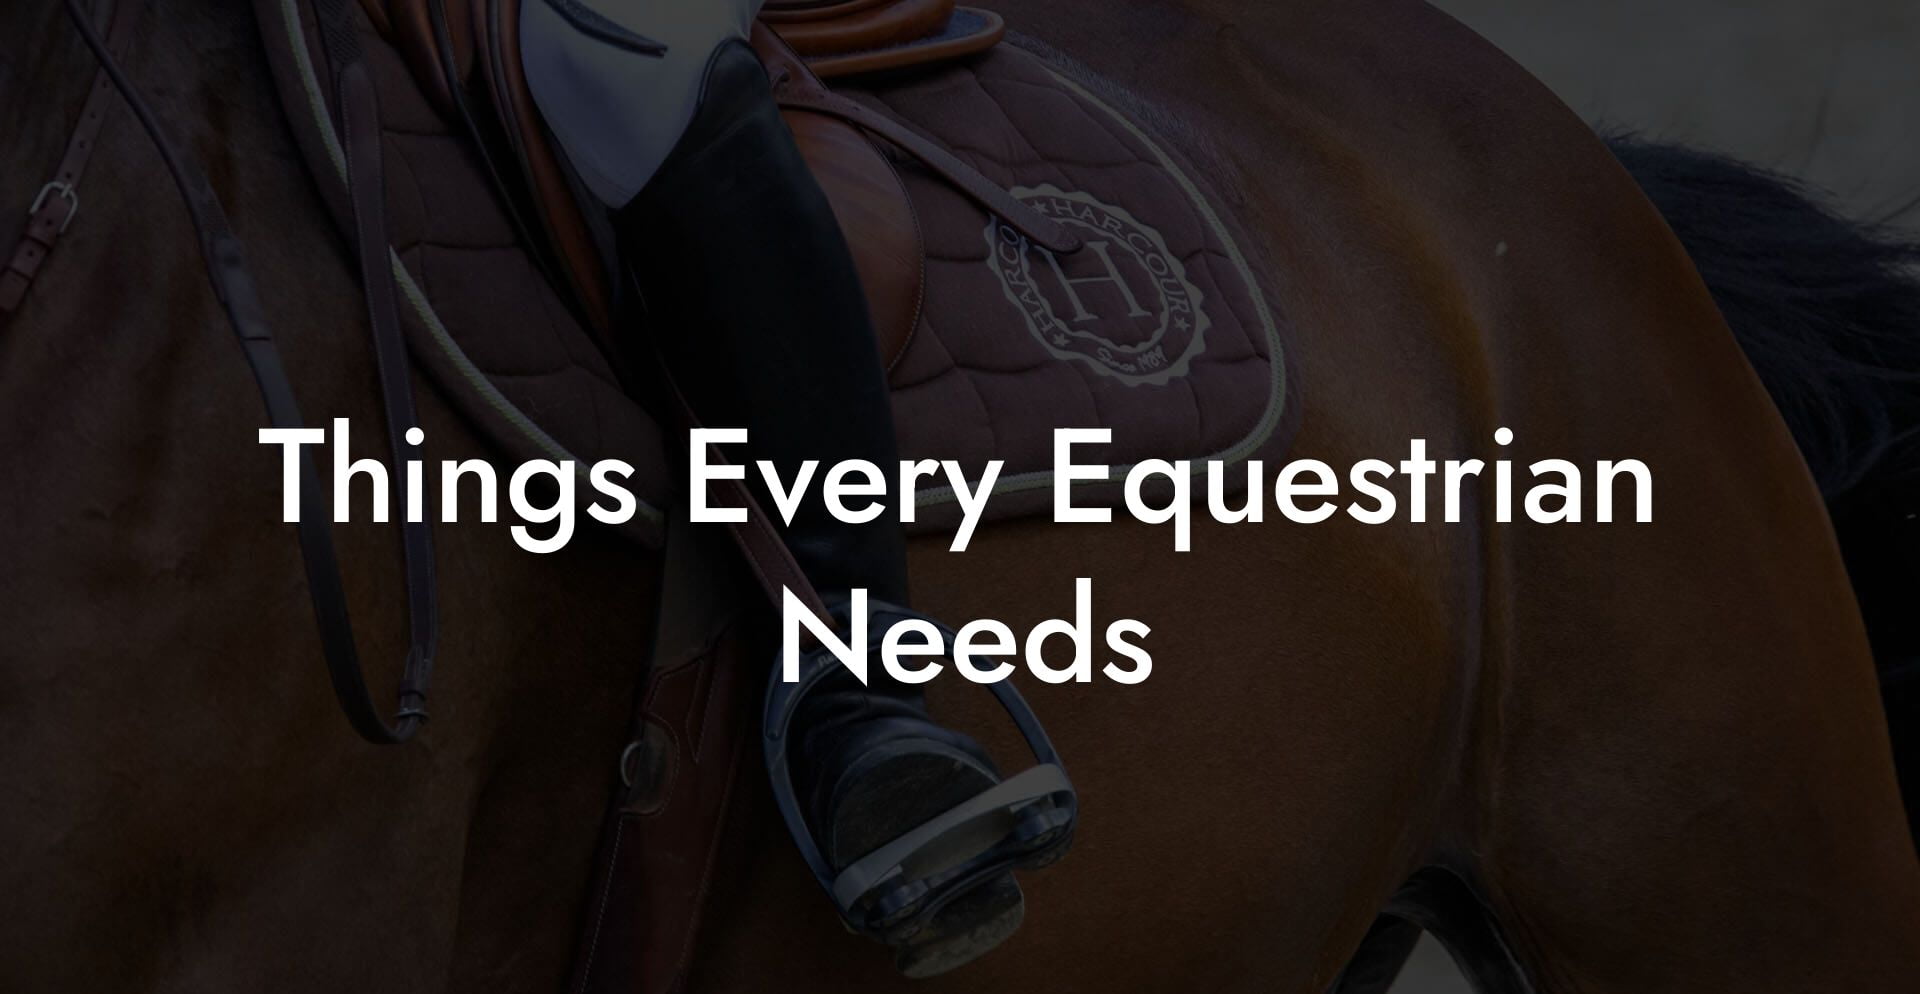 Things Every Equestrian Needs